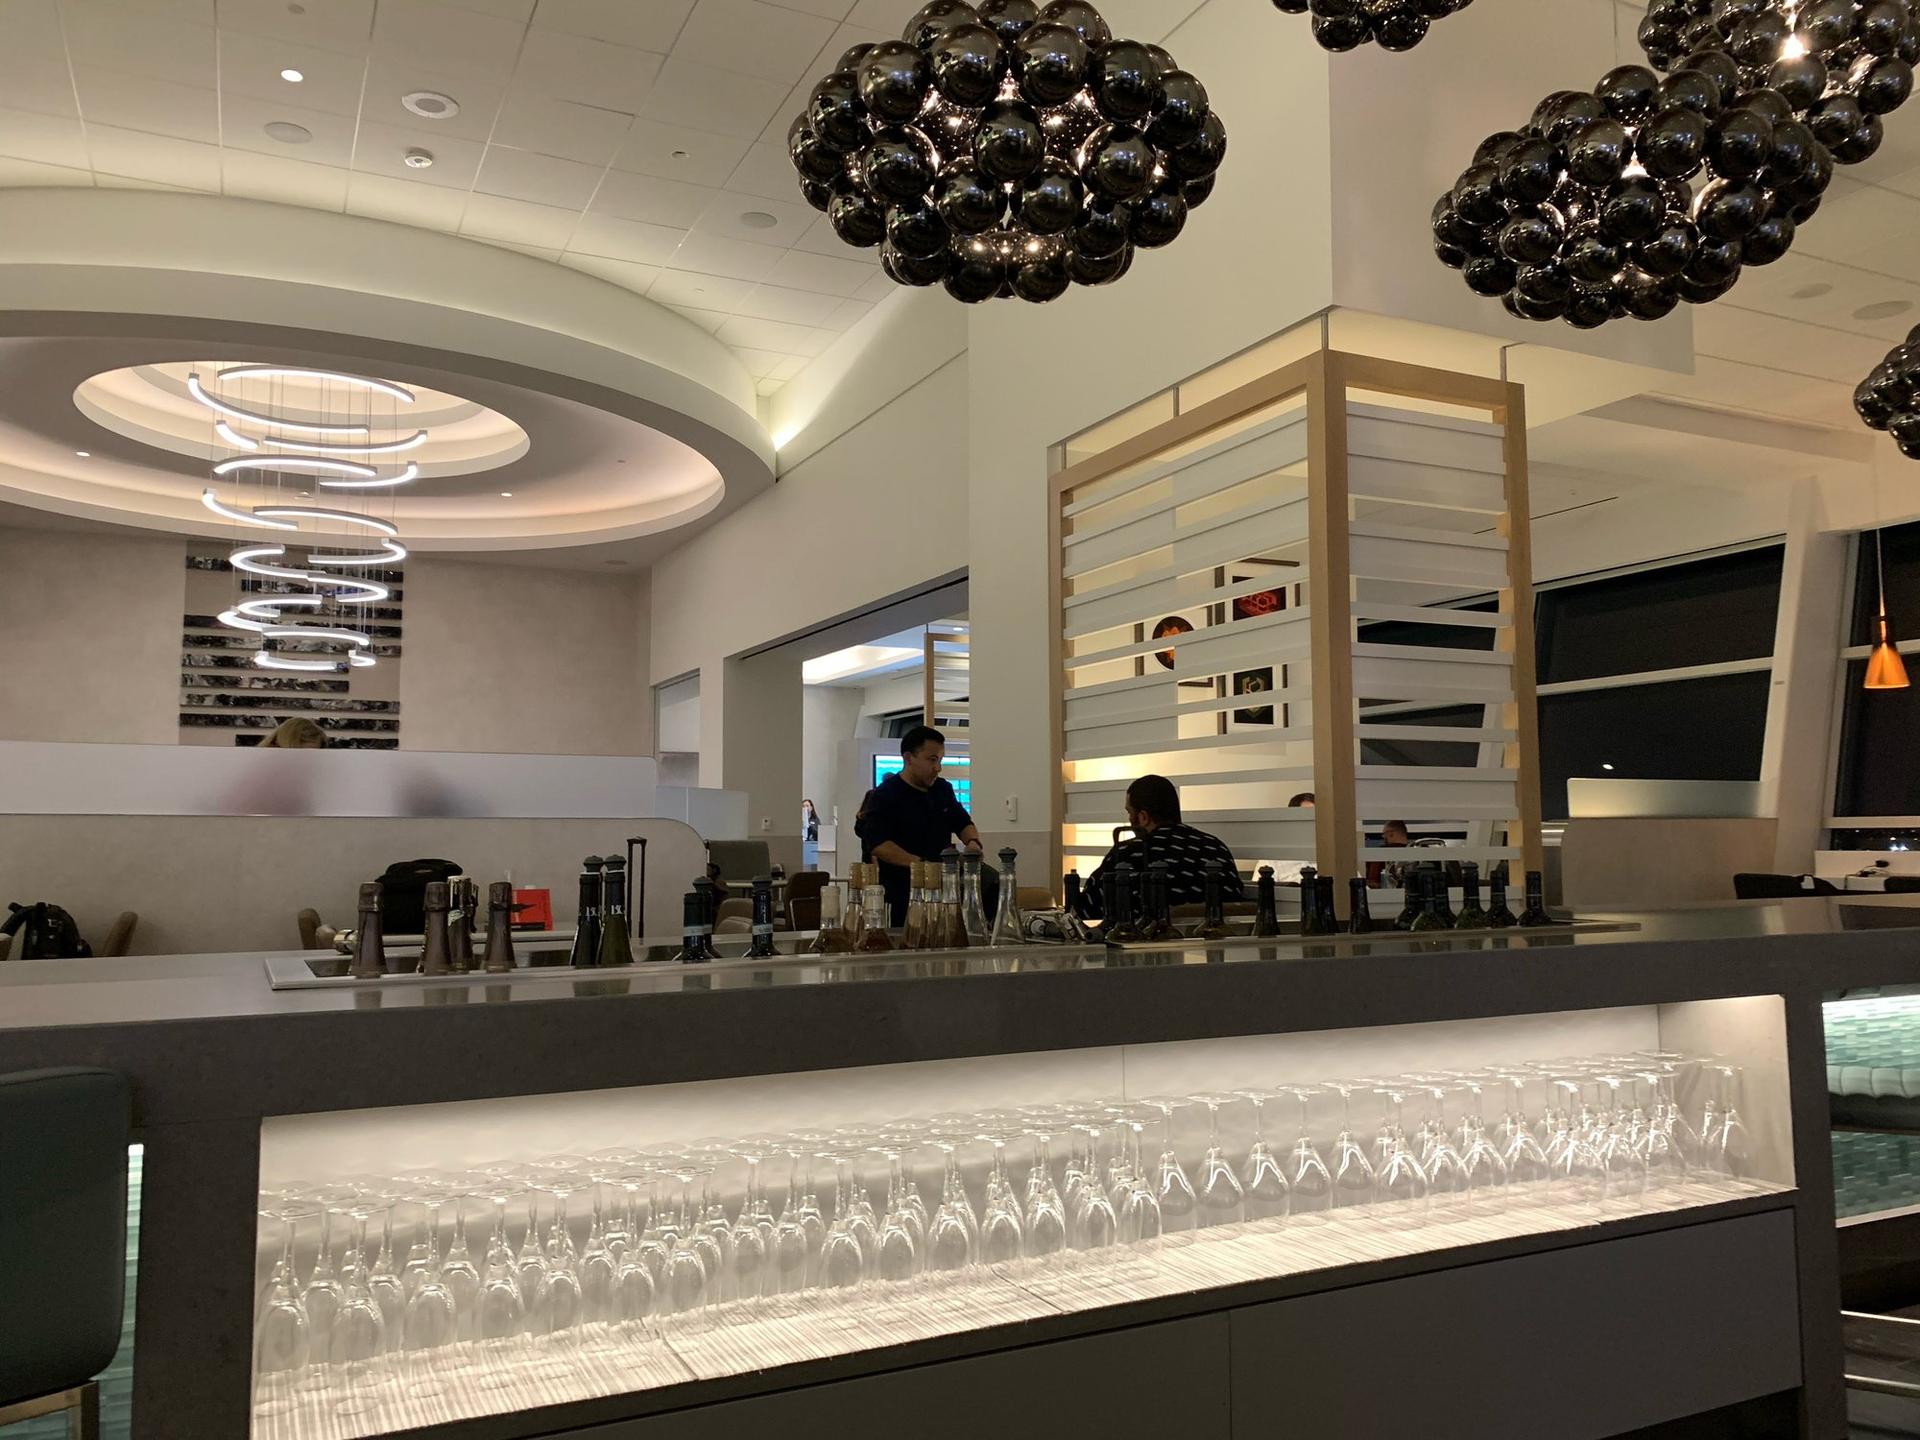 American Airlines Flagship Lounge image 14 of 55